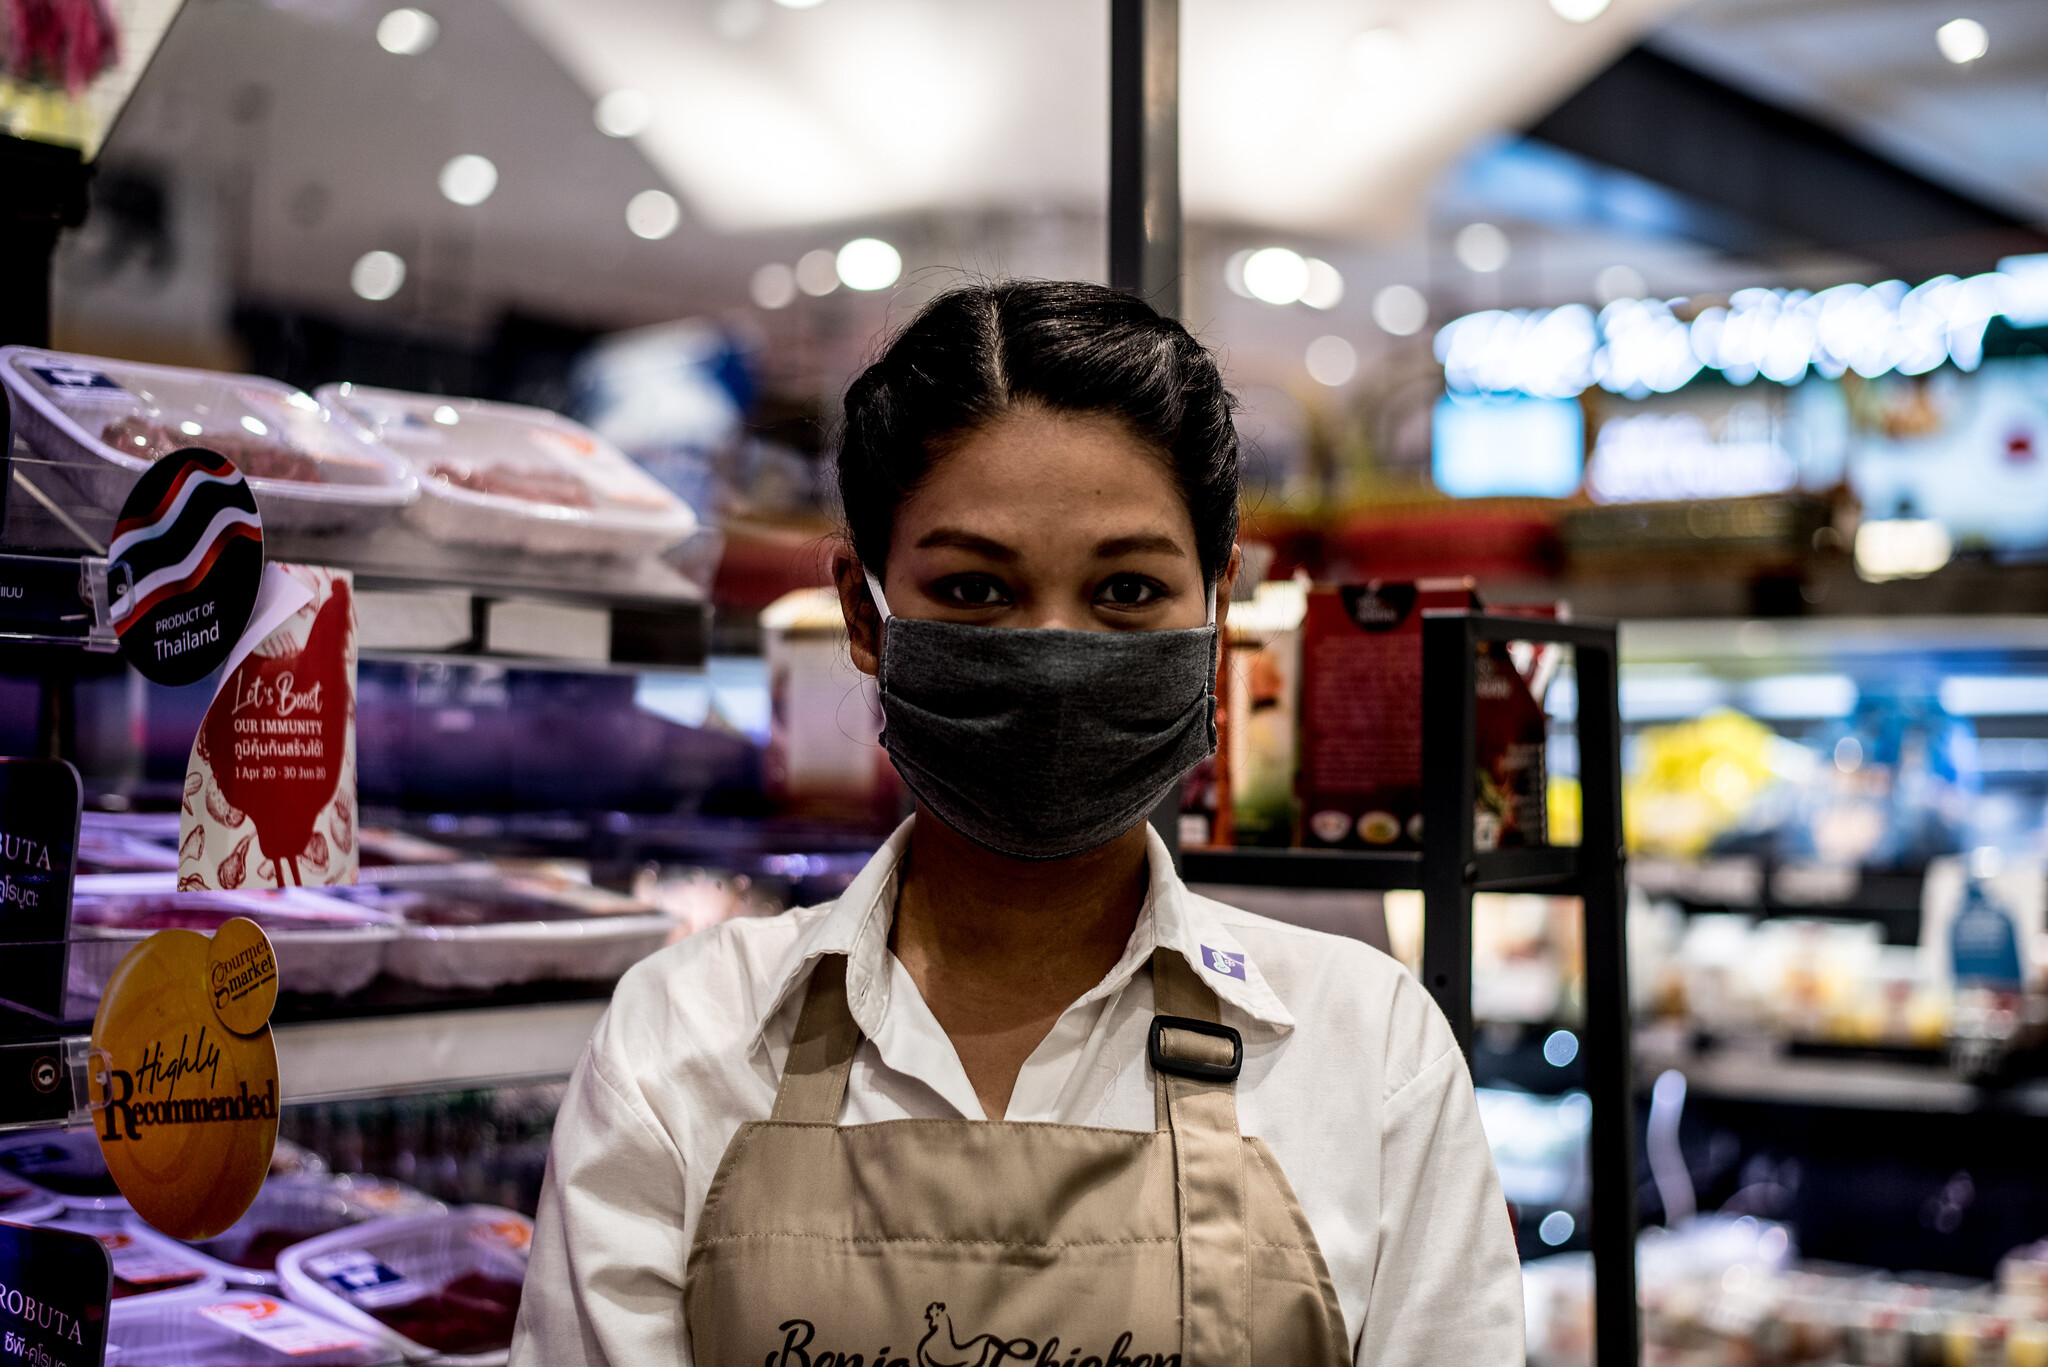 Woman wearing face mask during the COVID-19 pandemic in Thailand.